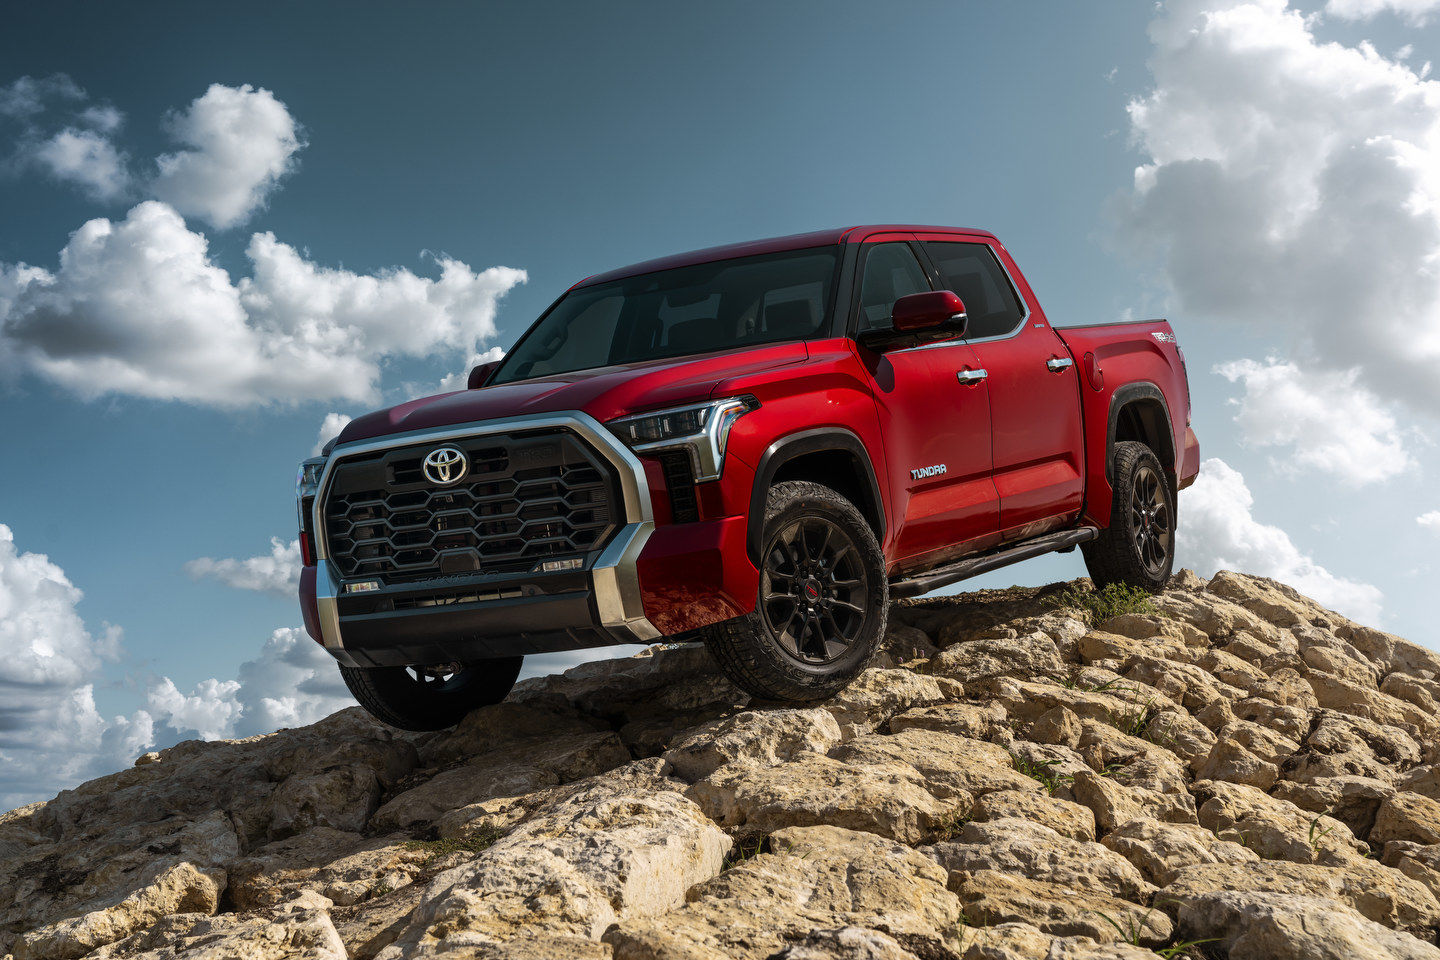 2022 Toyota SUV and truck towing capability guide